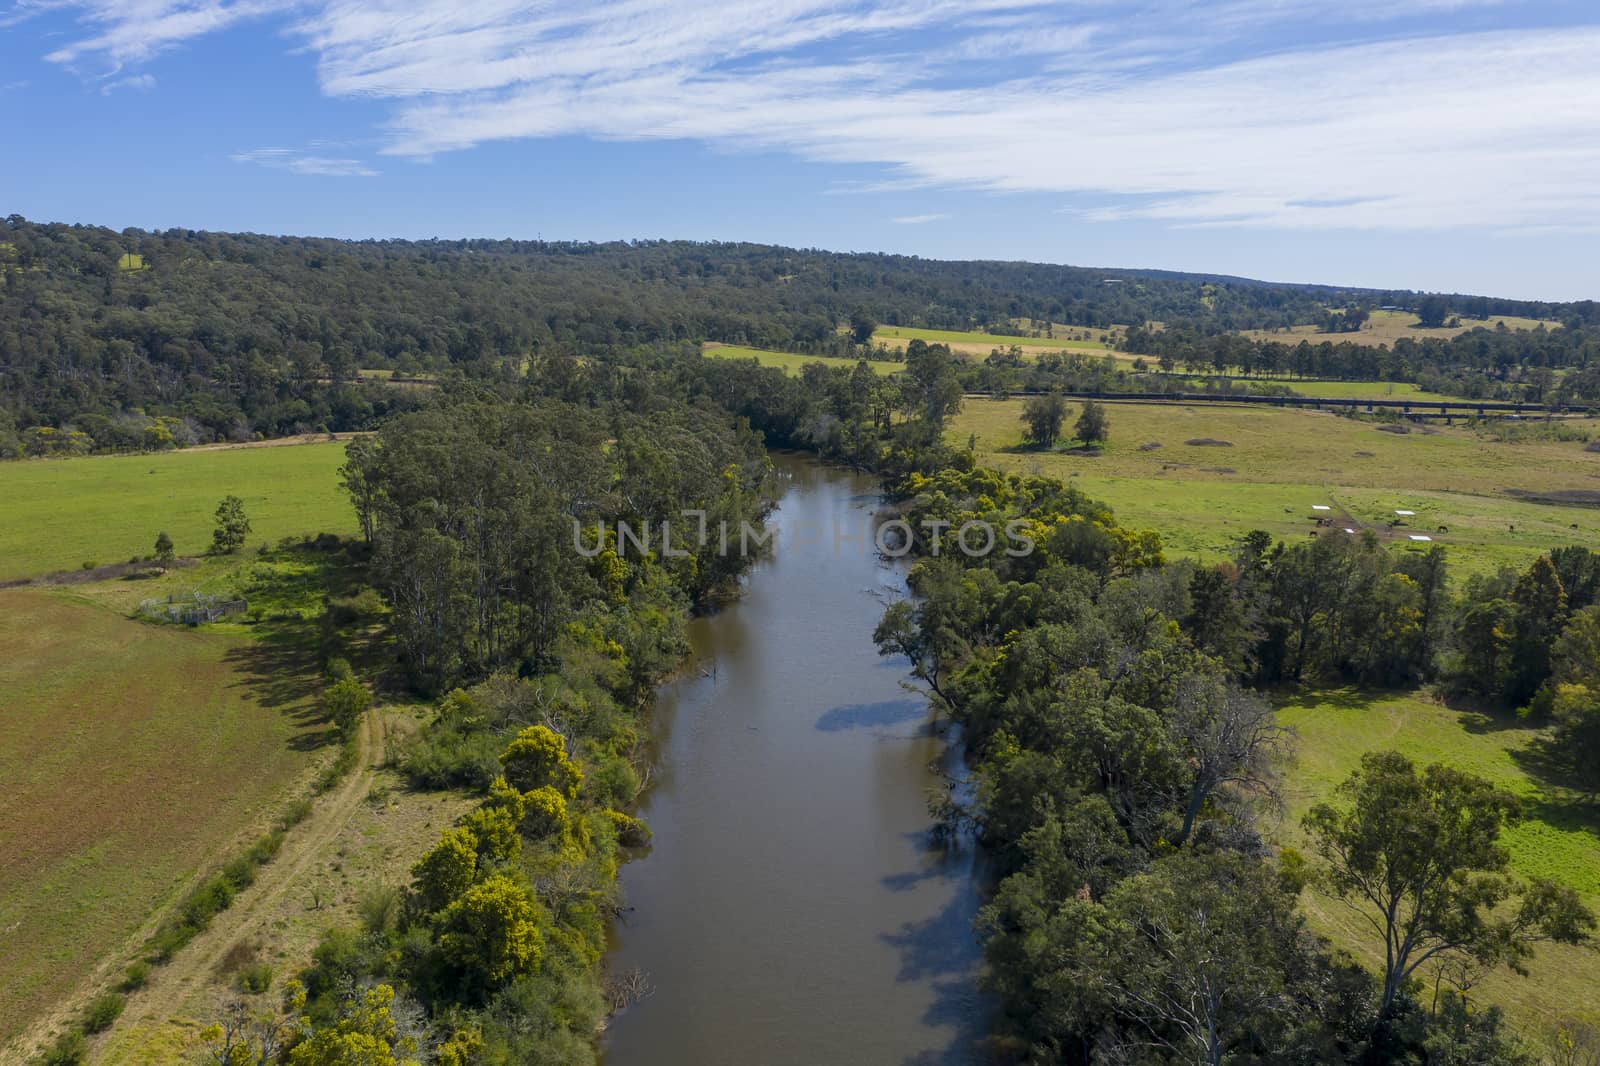 The Nepean River running through farmland in Wallacia in Wollondilly Shire in regional New South Wales in Australia